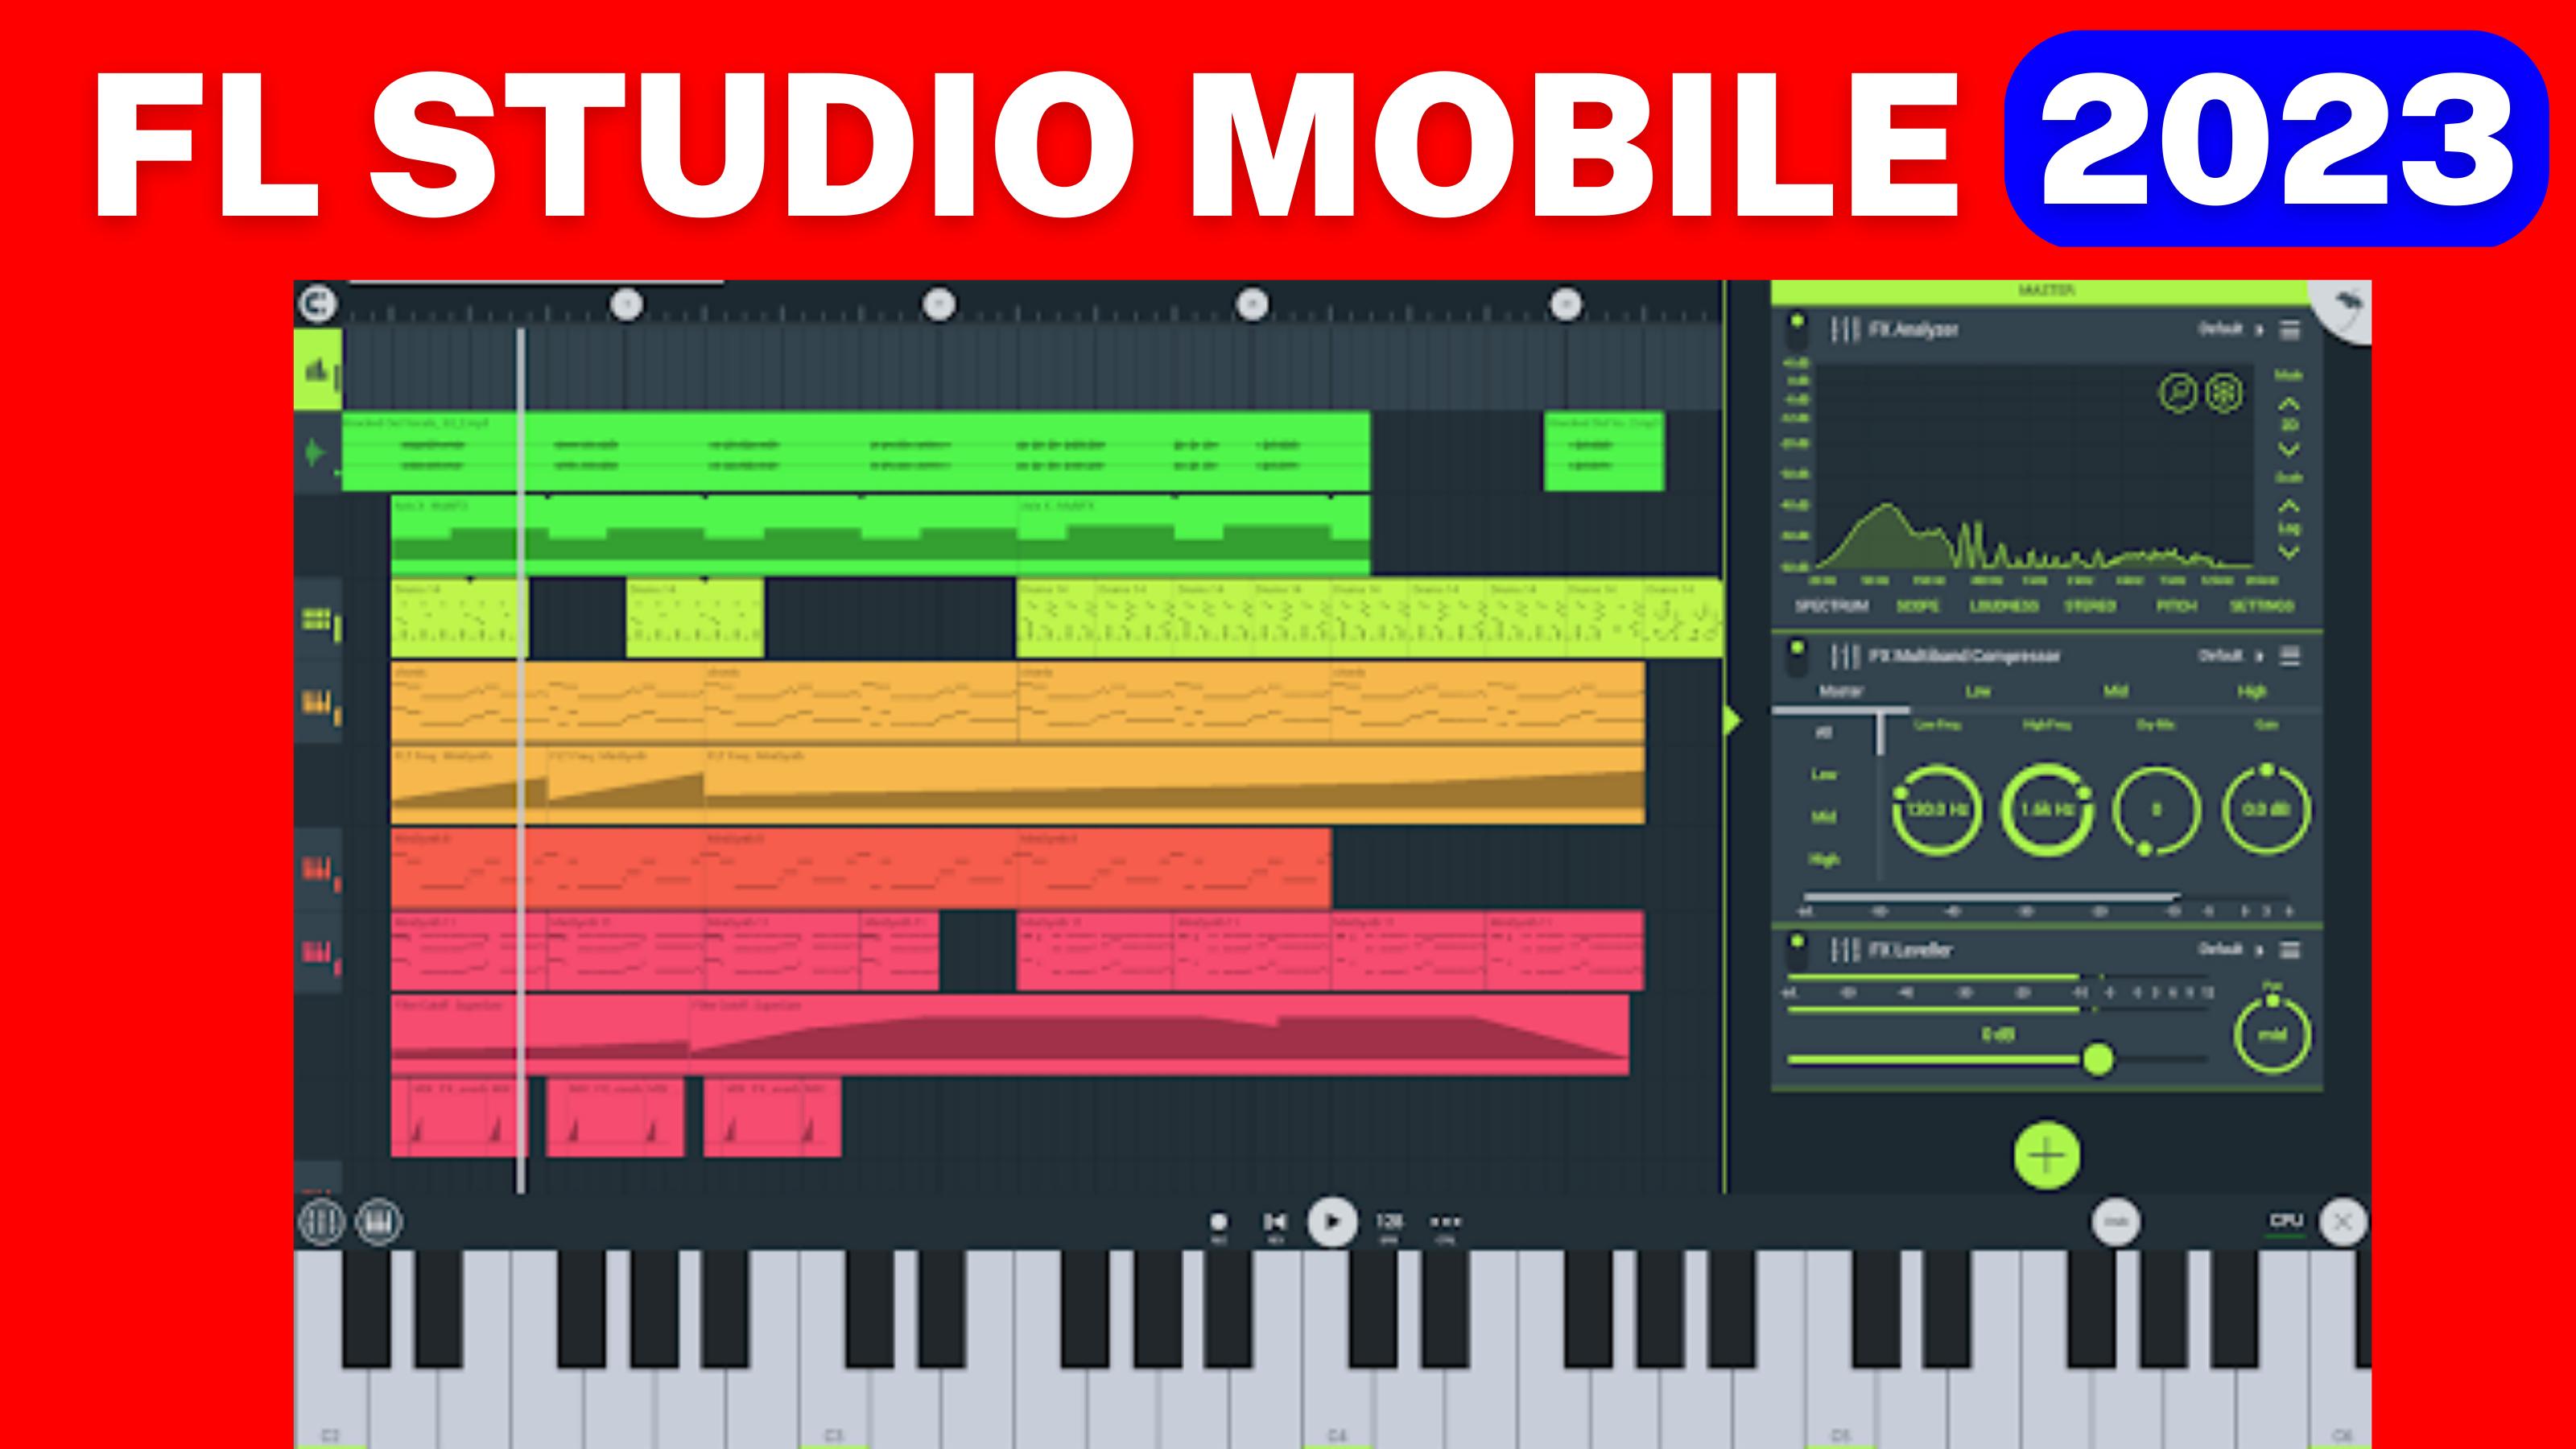 FL STUDIO MOBILE 2023 Latest Version 1.0 for Android